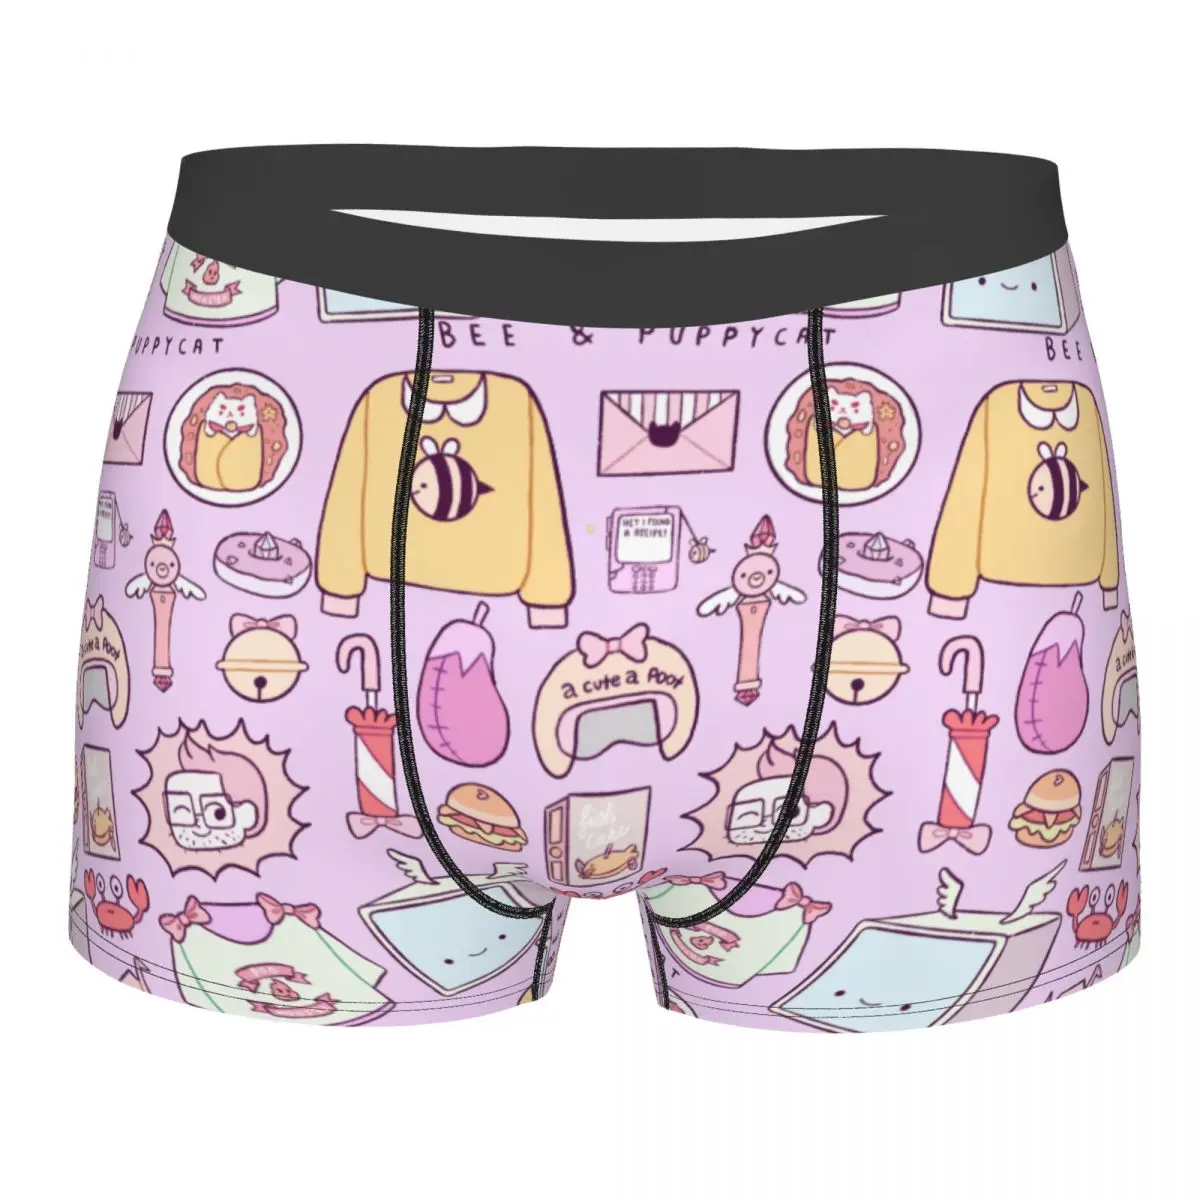 

Bee And Puppycat Items Man Underwear Boxer Briefs Shorts Panties Novelty Soft Underpants for Homme S-XXL